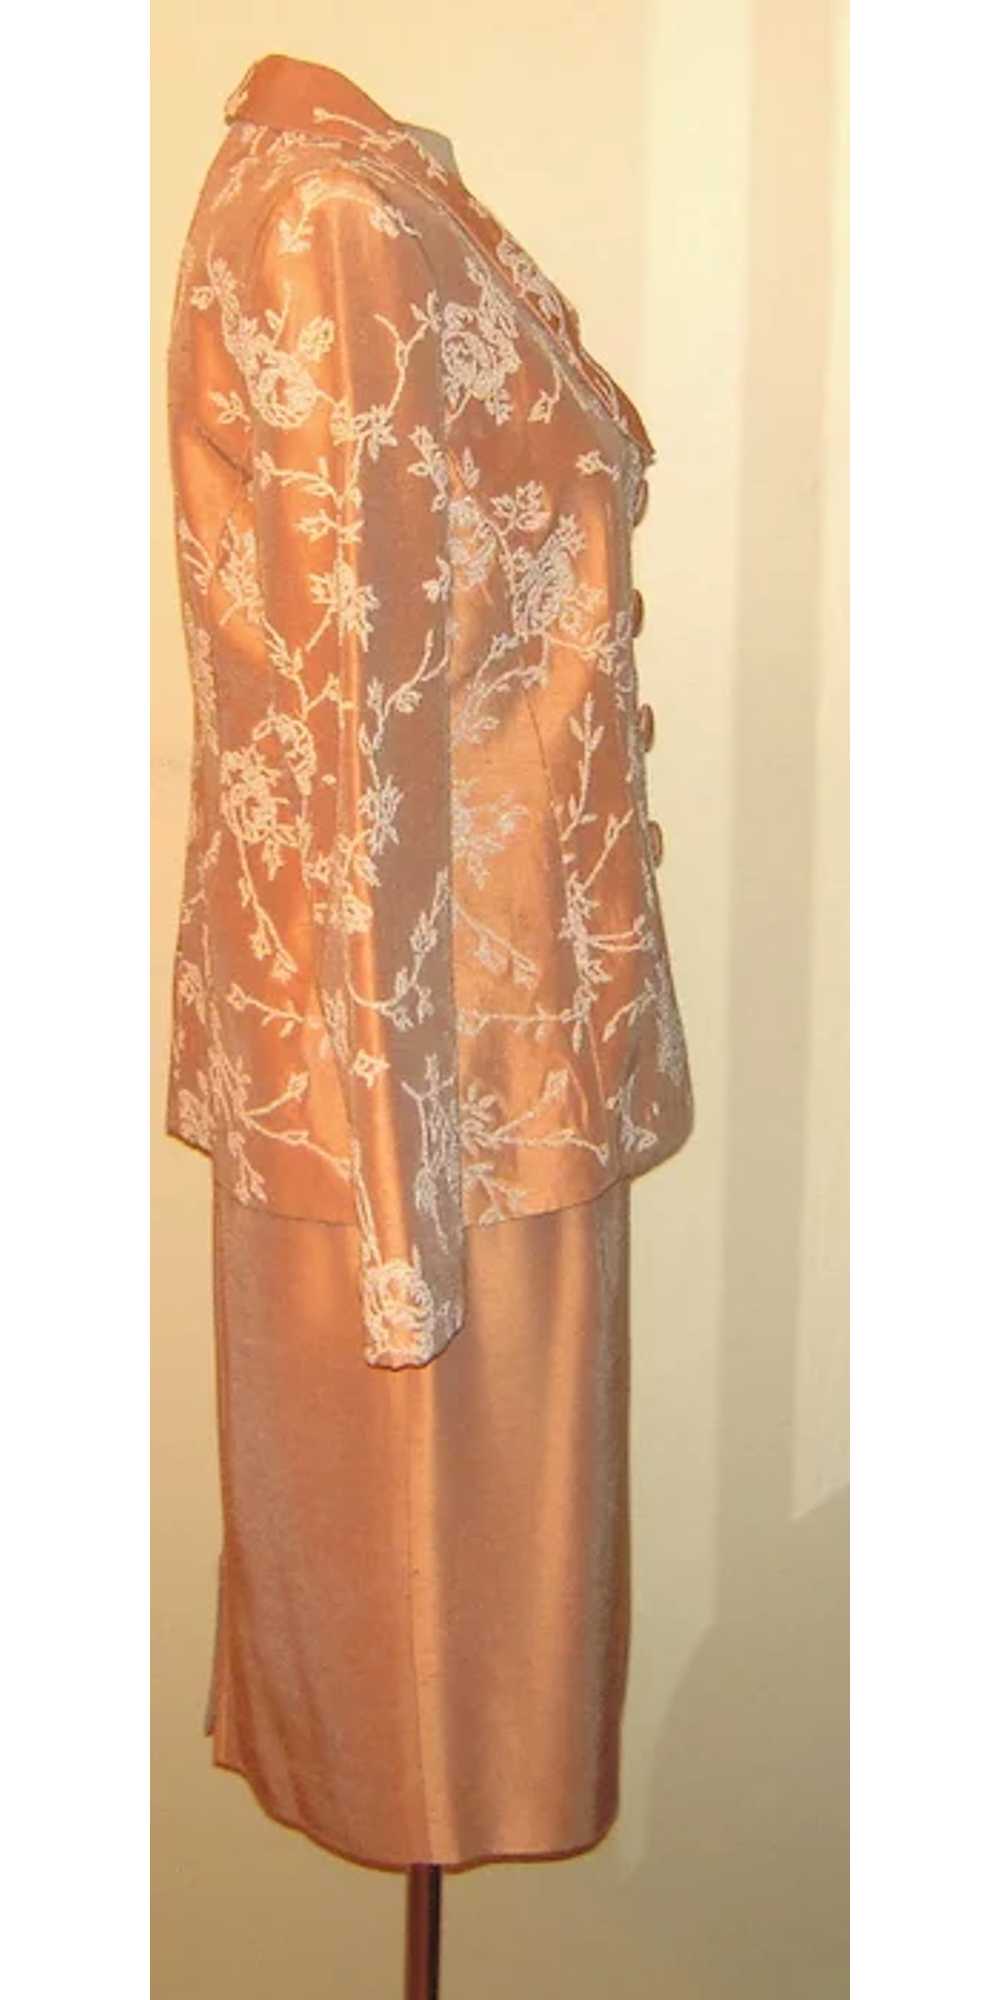 Vintage Peach Tan Suit with White Beading - image 5